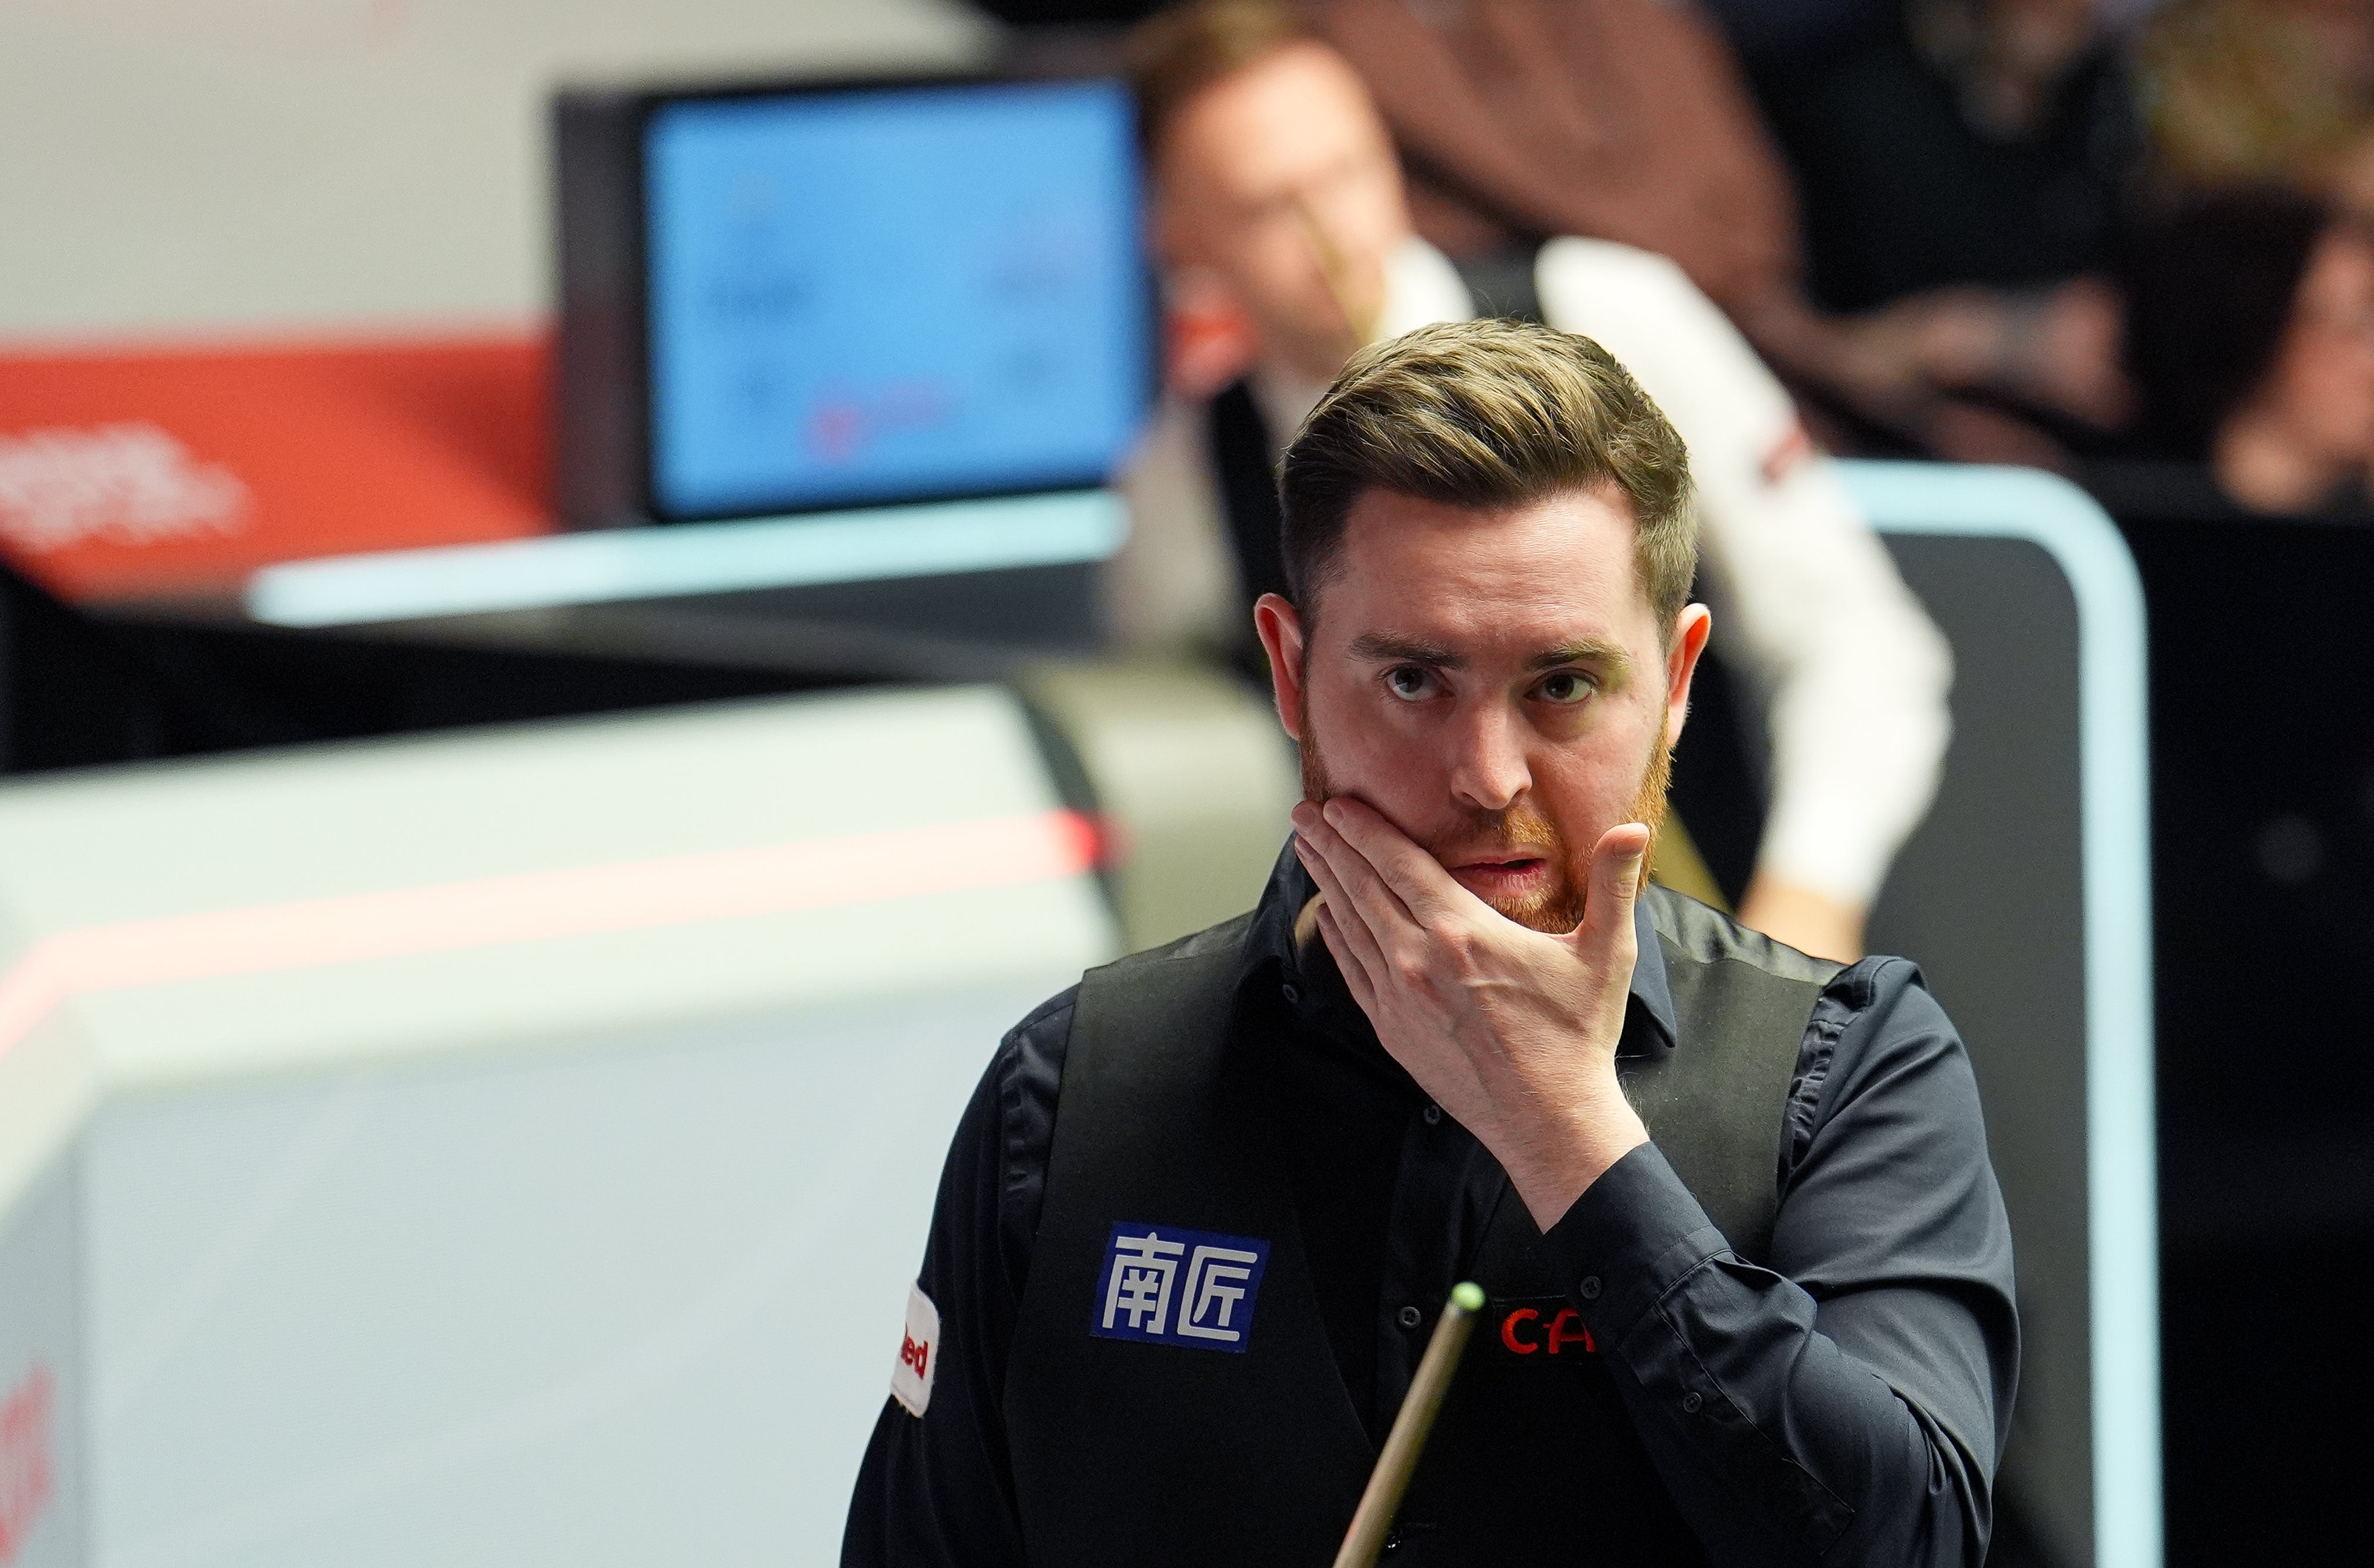 world snooker championship live: scores and updates as trump and o’sullivan in quarter-final action